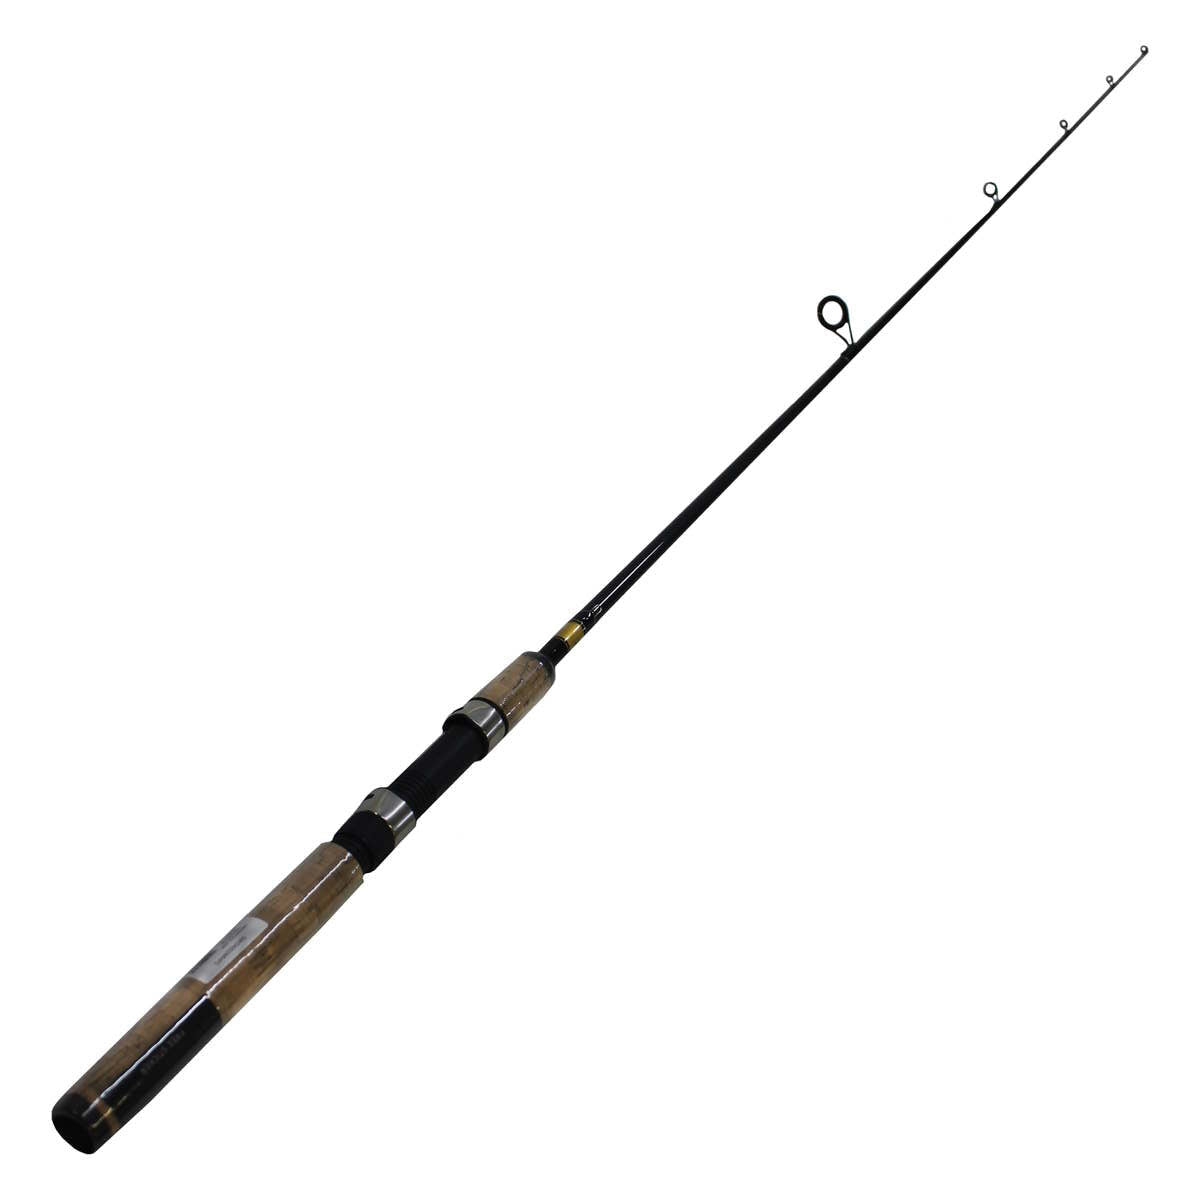 Photo of Daiwa Sweepfire-D Spinning Rod for sale at United Tackle Shops.